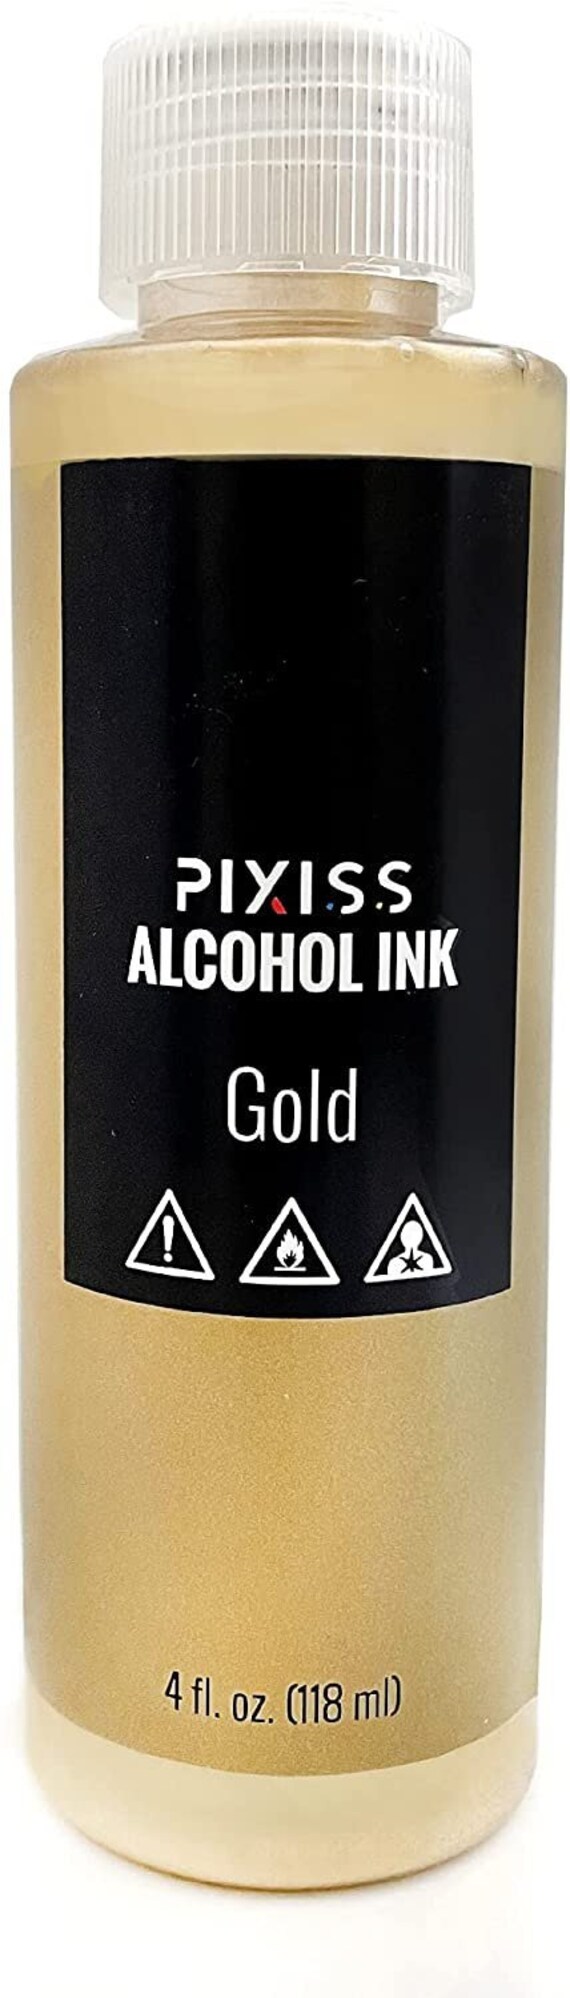 Pixiss White Alcohol Ink 4-Ounce, Pixiss (3) 20ml Needle Tip